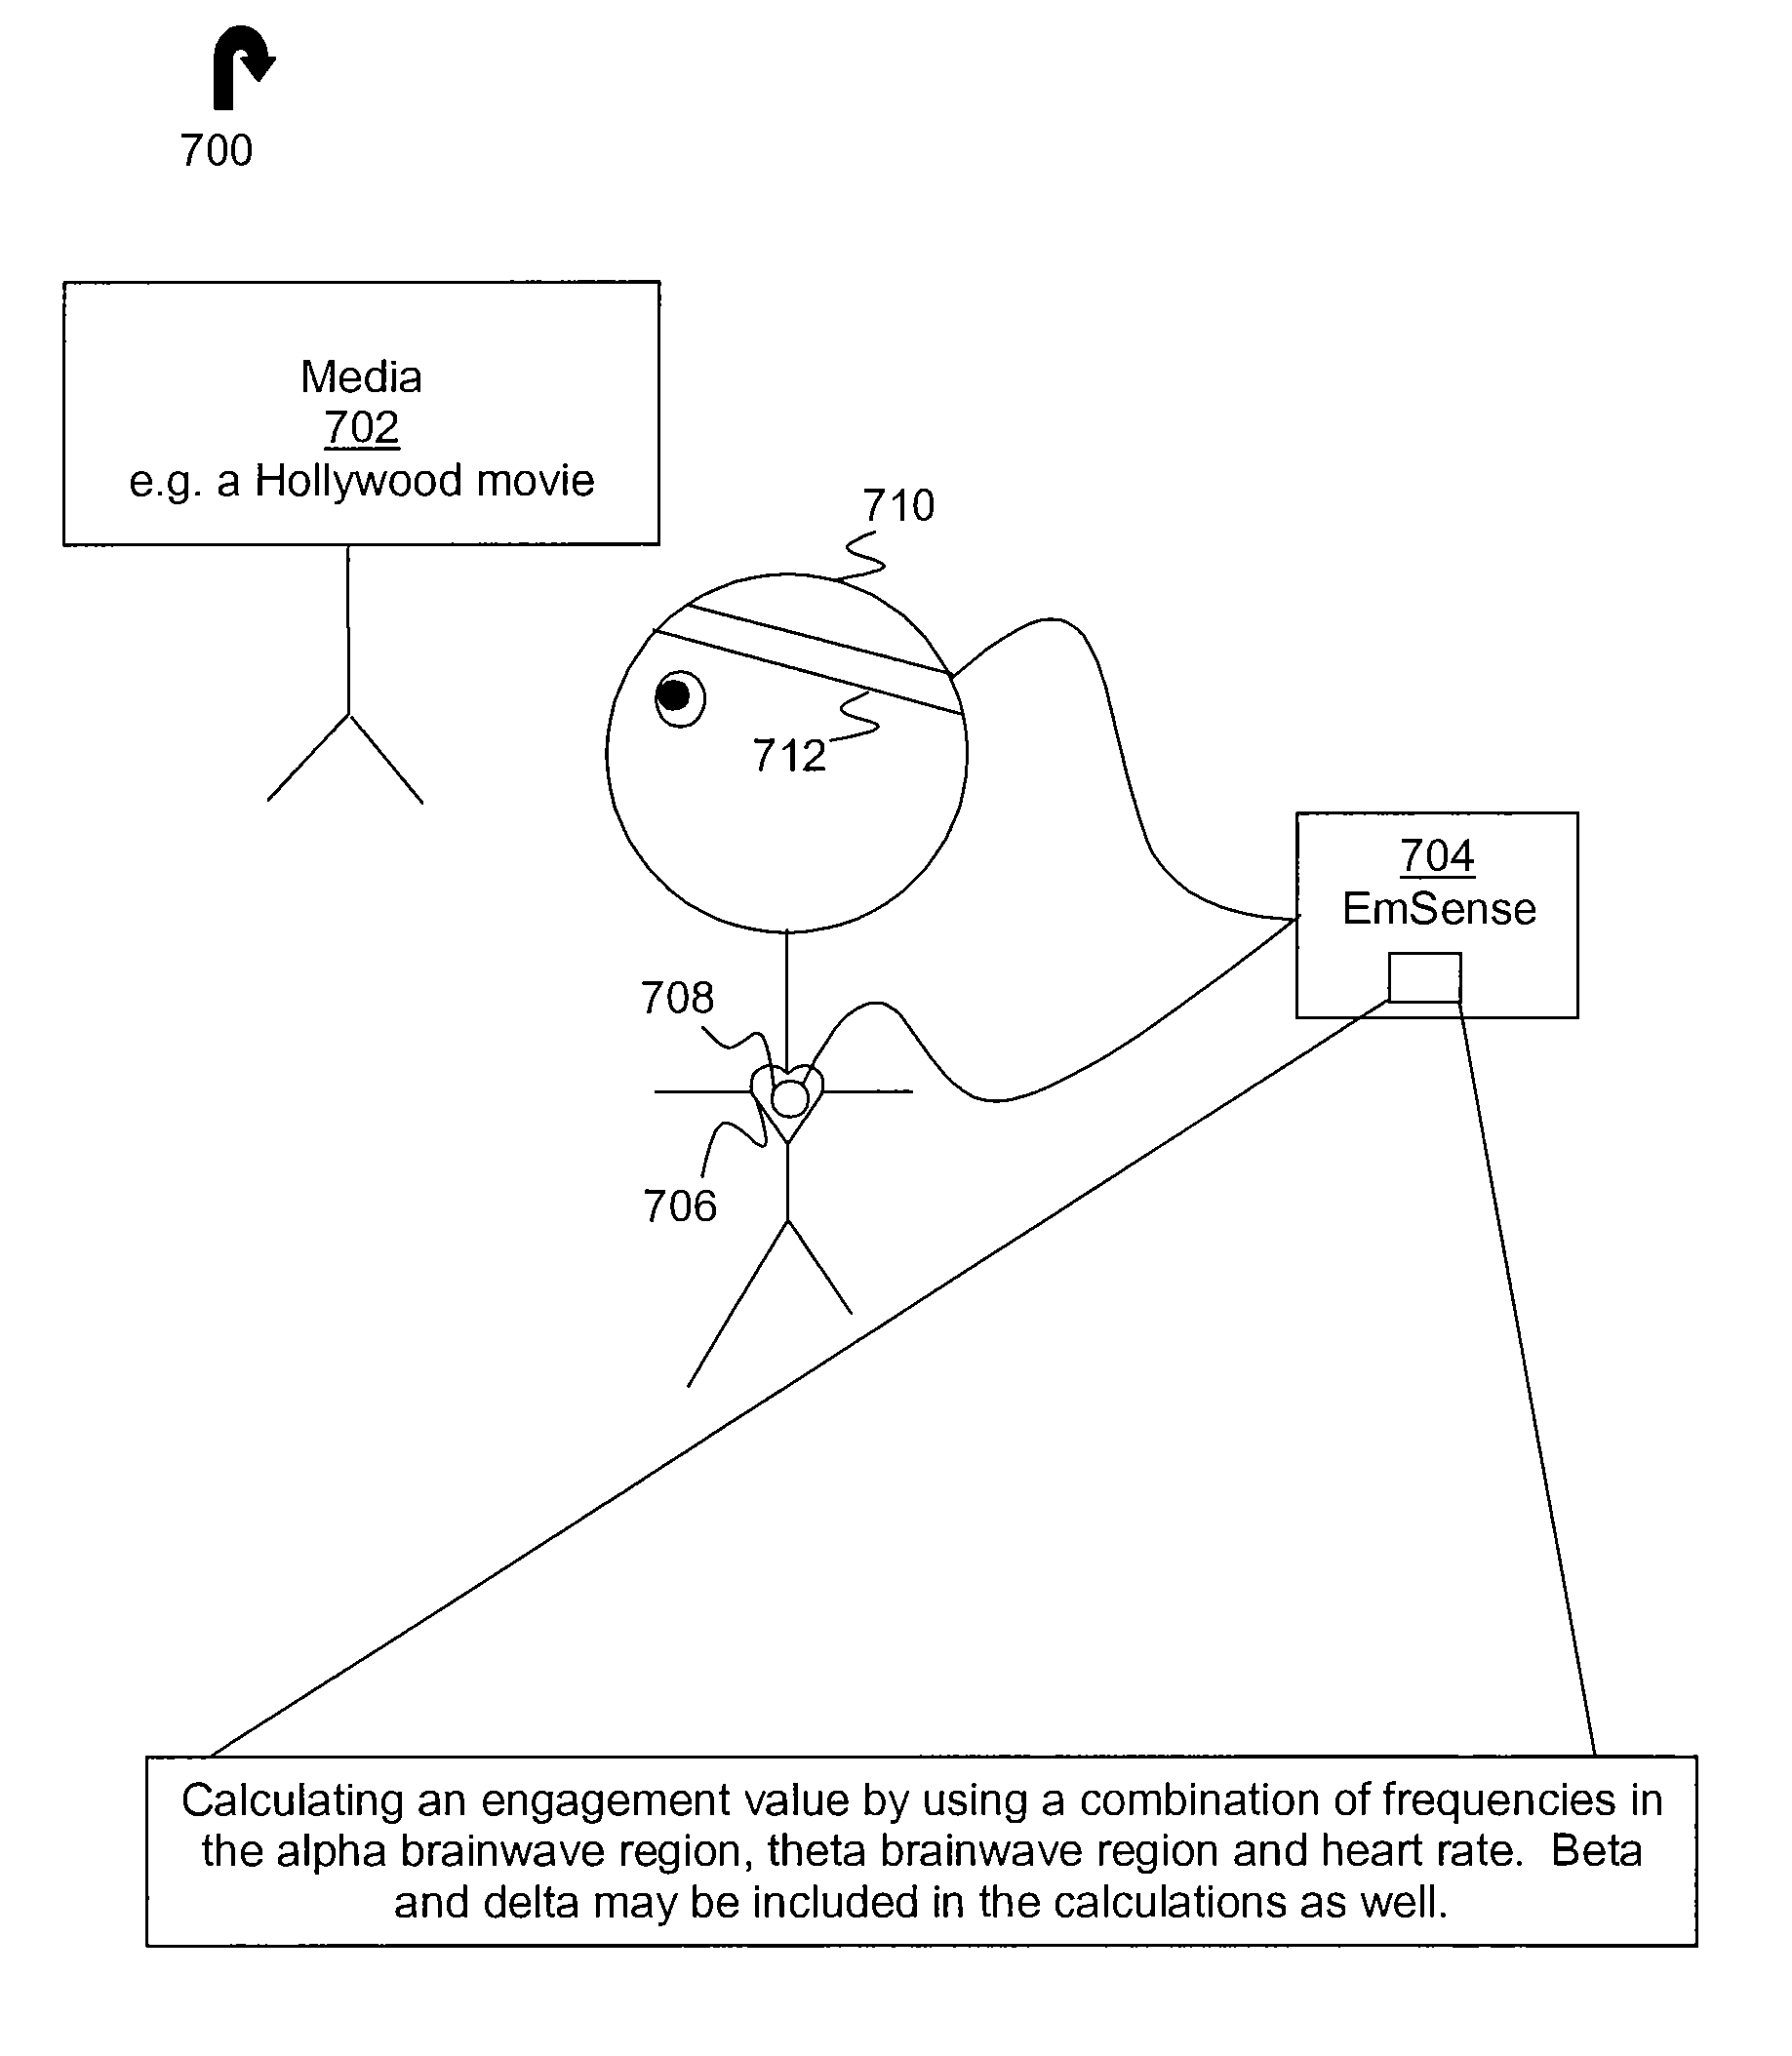 Method and system for measuring and ranking an "engagement" response to audiovisual or interactive media, products, or activities using physiological signals